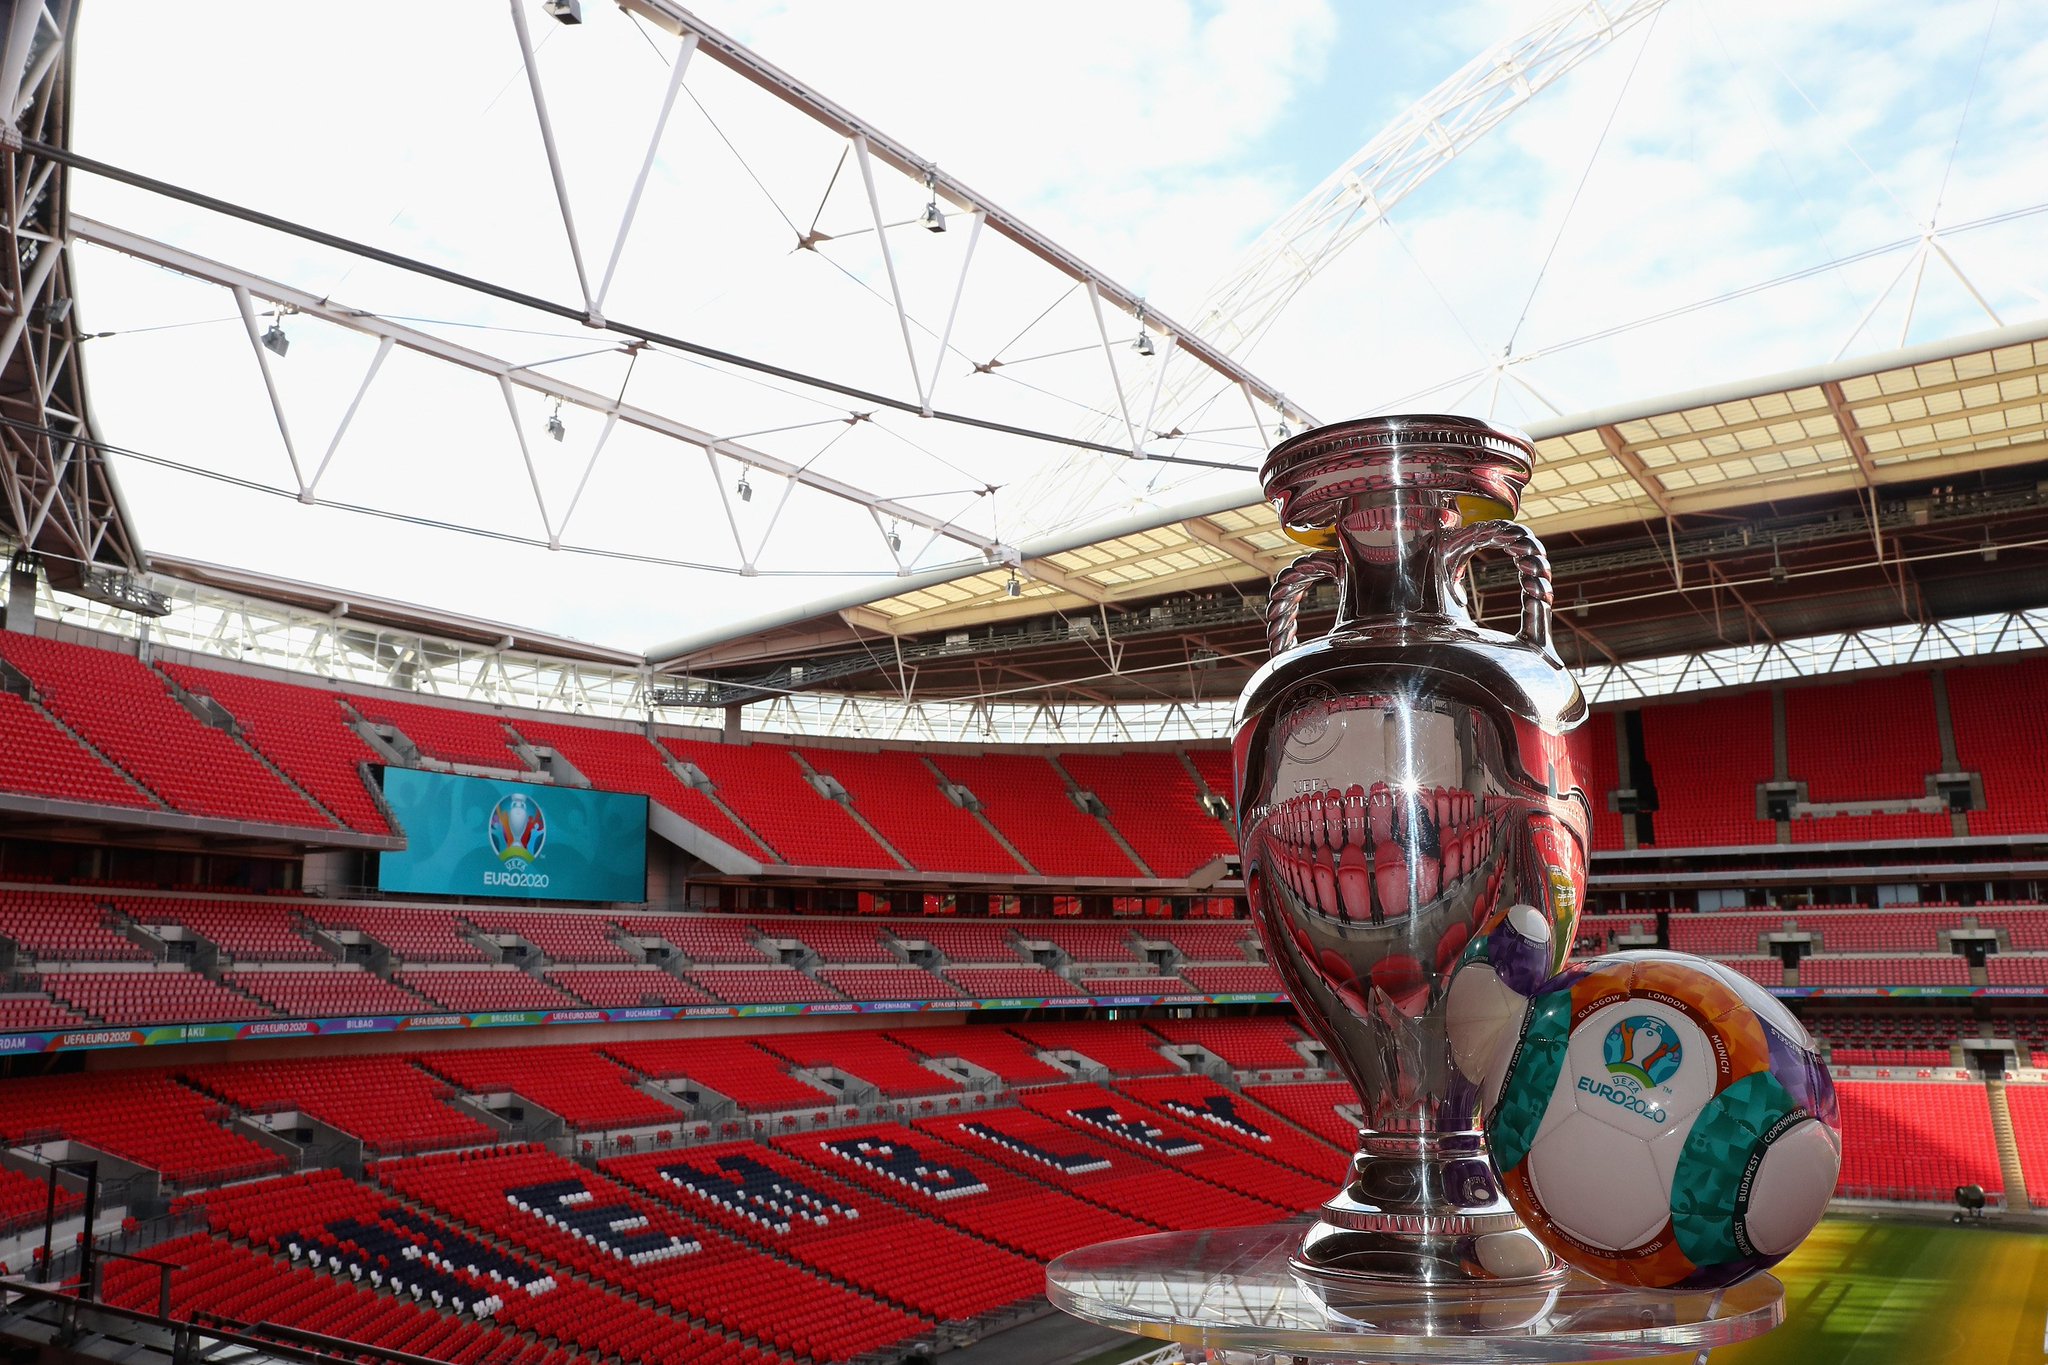 Uefa Euro 2020 On Twitter Wembley Stadium Will Host 7 Euro 2020 Games Including The Final